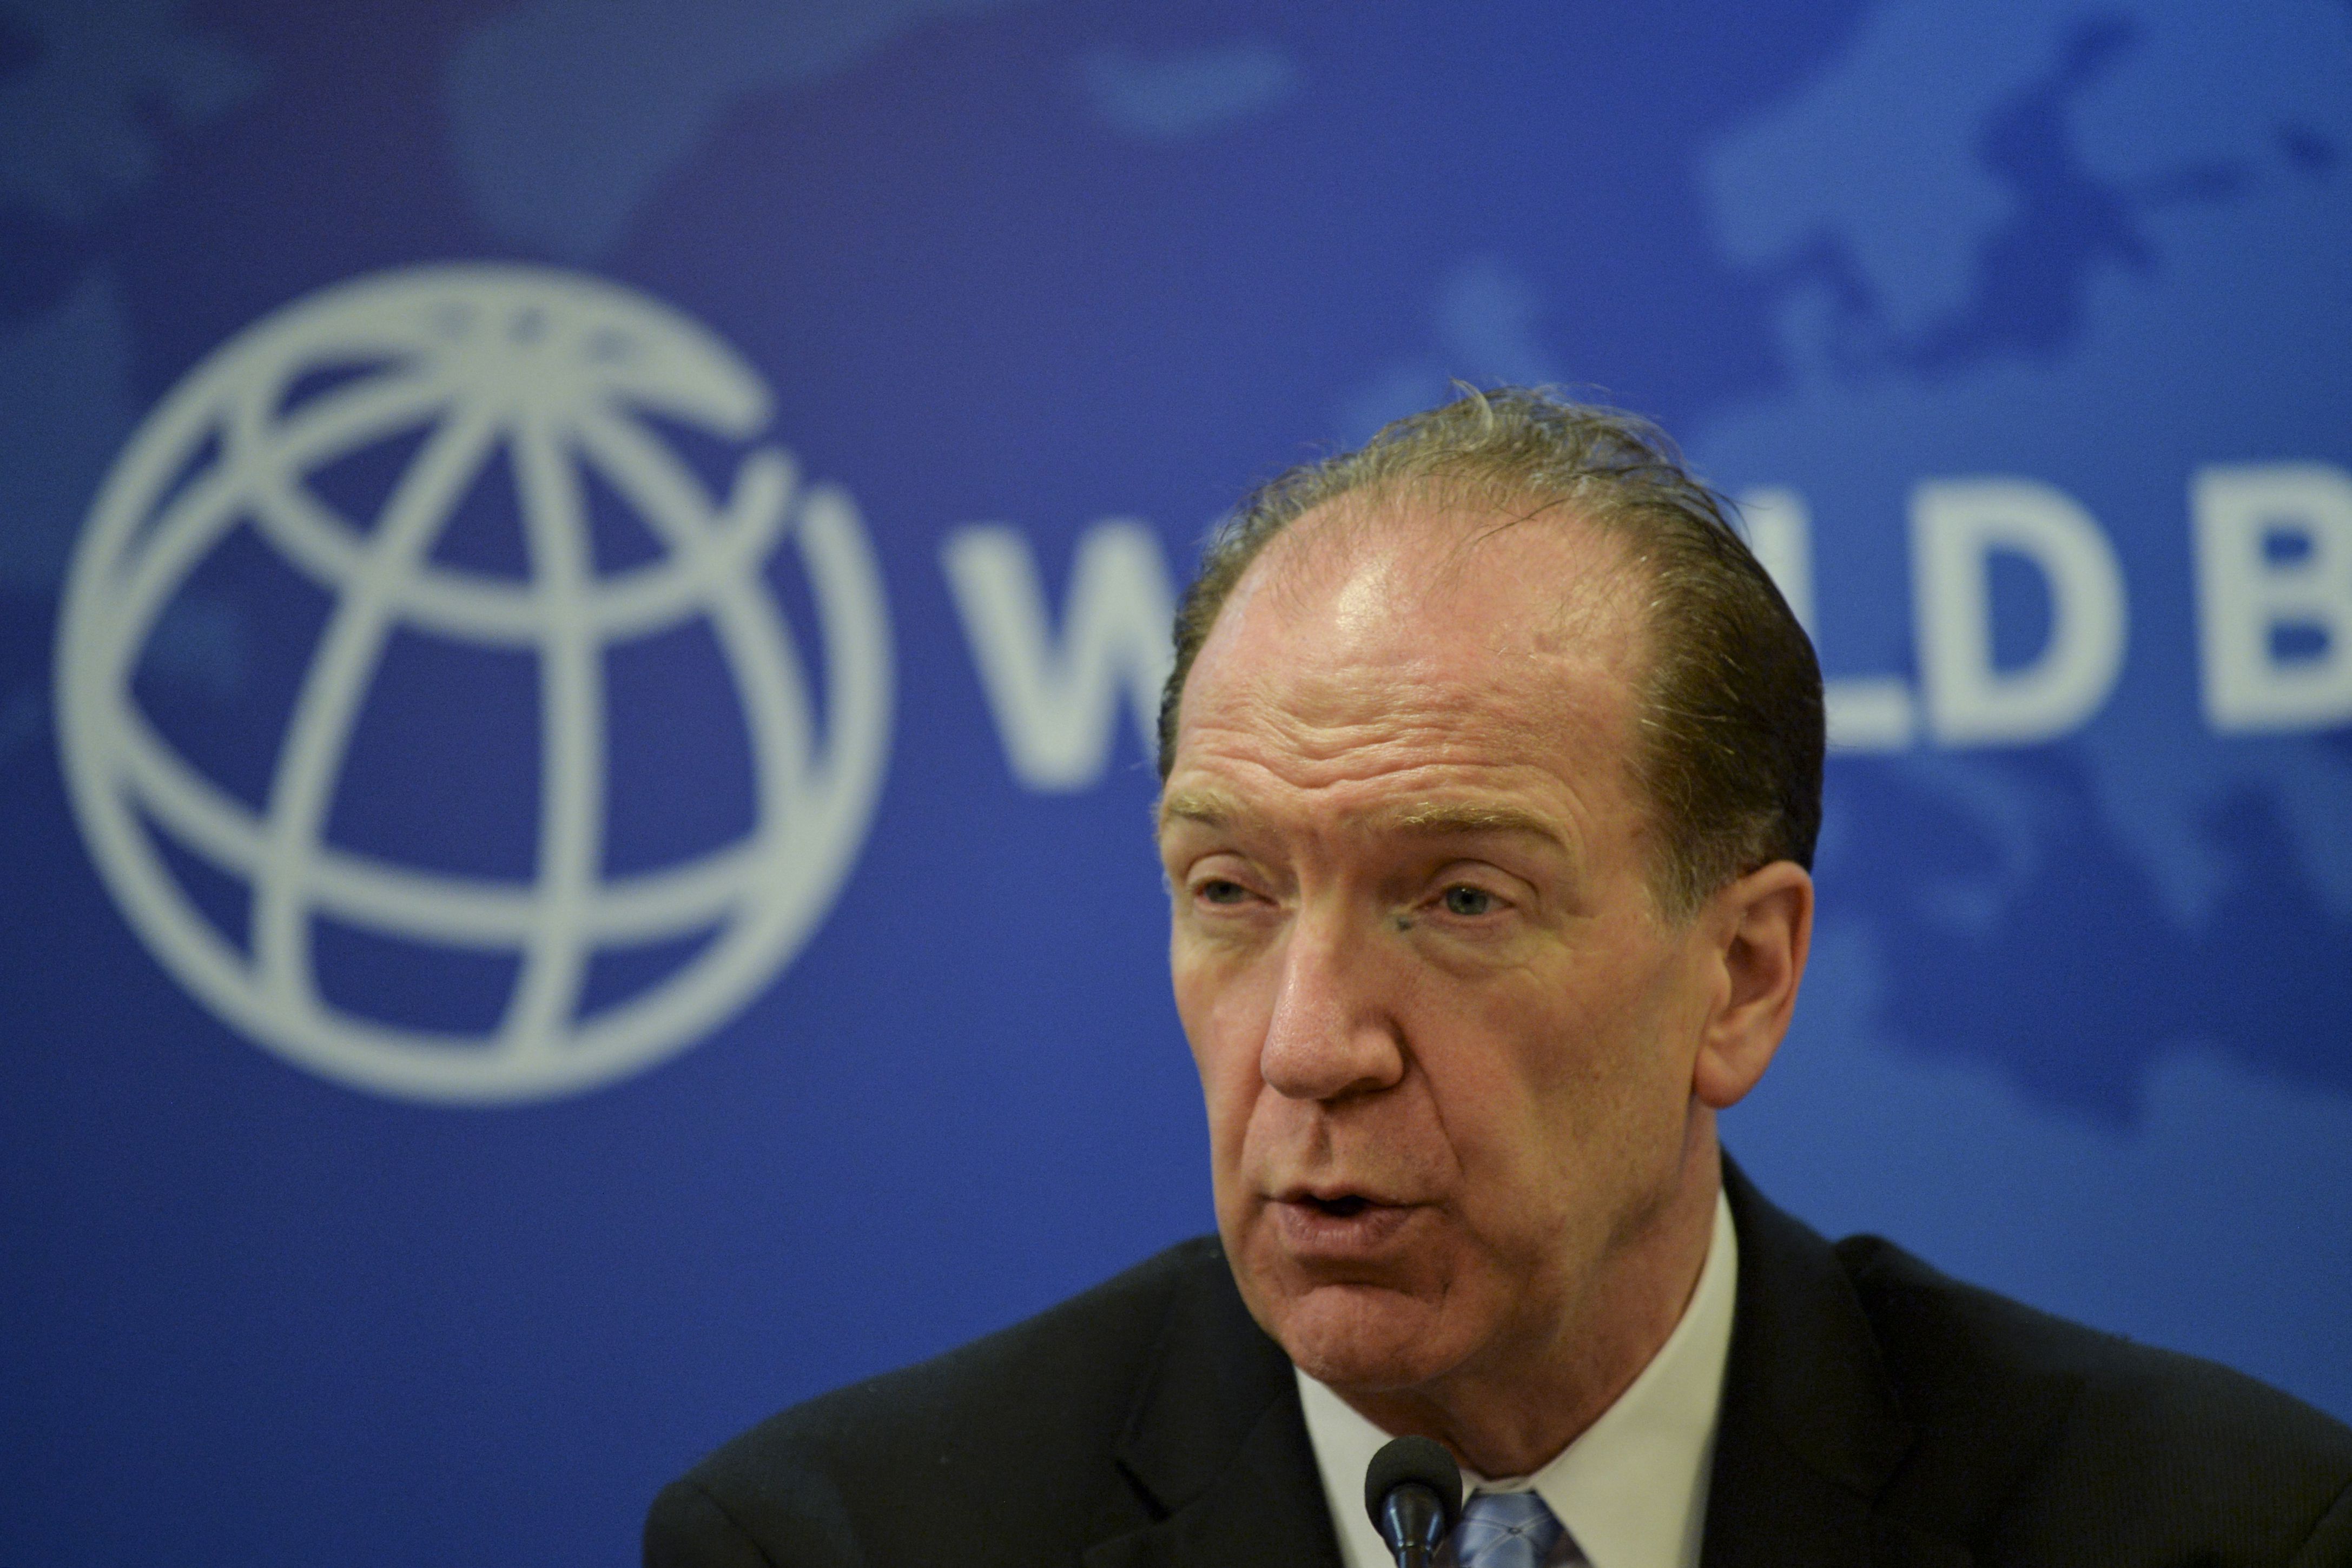 World Bank president sees “convergences” on debt and reforms